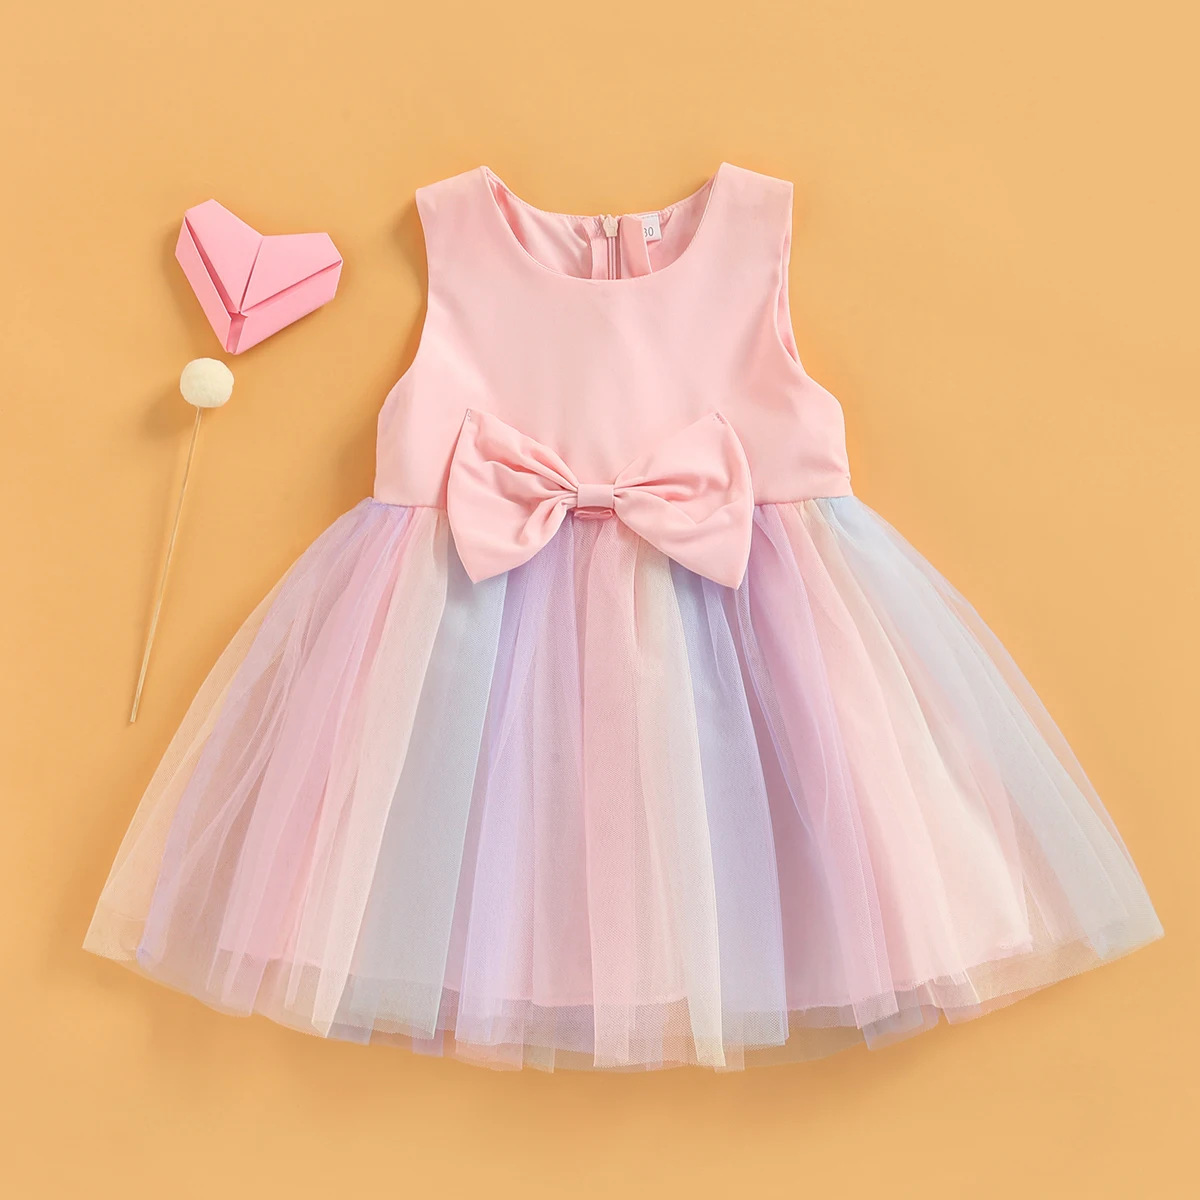 ma&baby 1-5Y Toddler Kid Baby Girl Tutu Dress Summer Bow Tulle Rainbow Party Birthday Wedding Dresses For Girls cocktail dresses